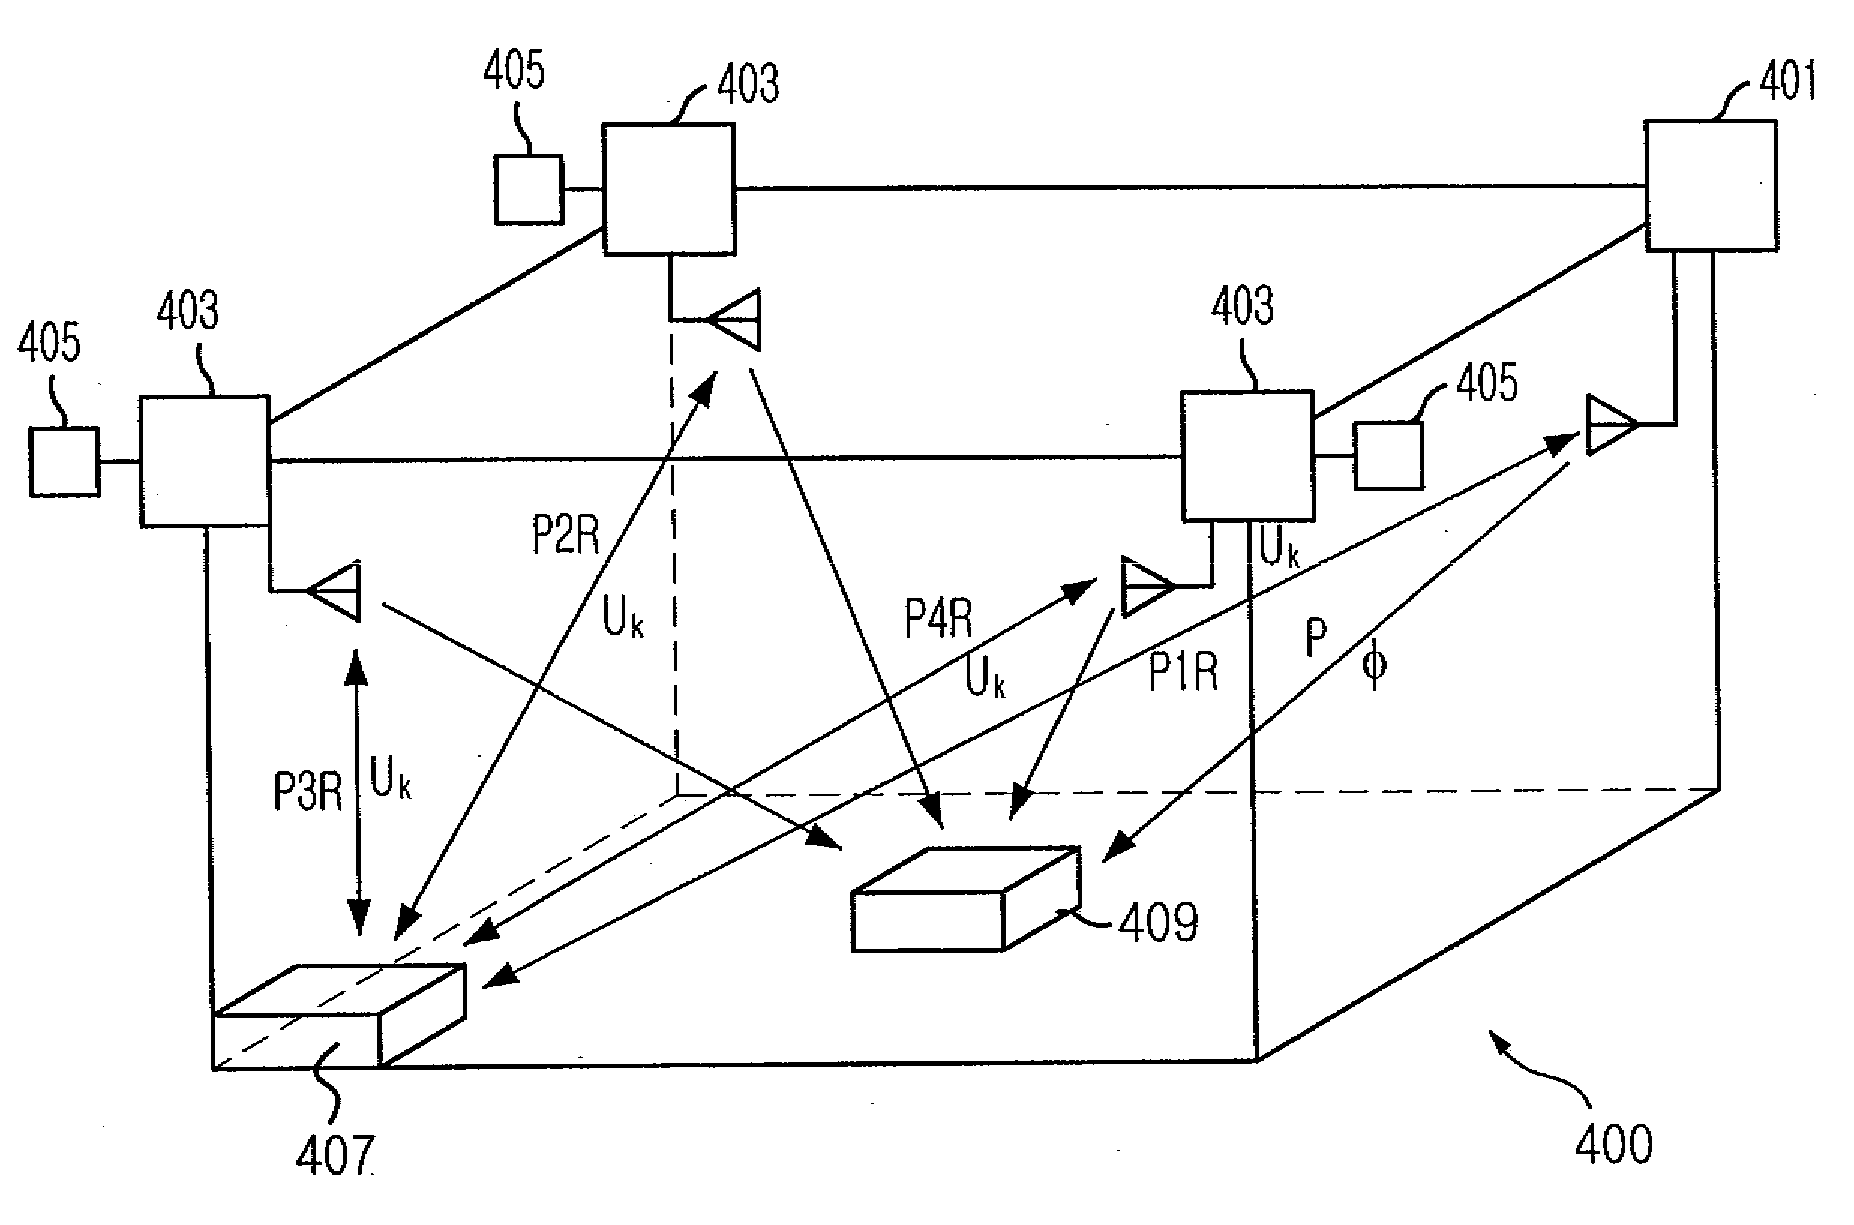 Pseudolite-based precise positioning system with synchronised pseudolites